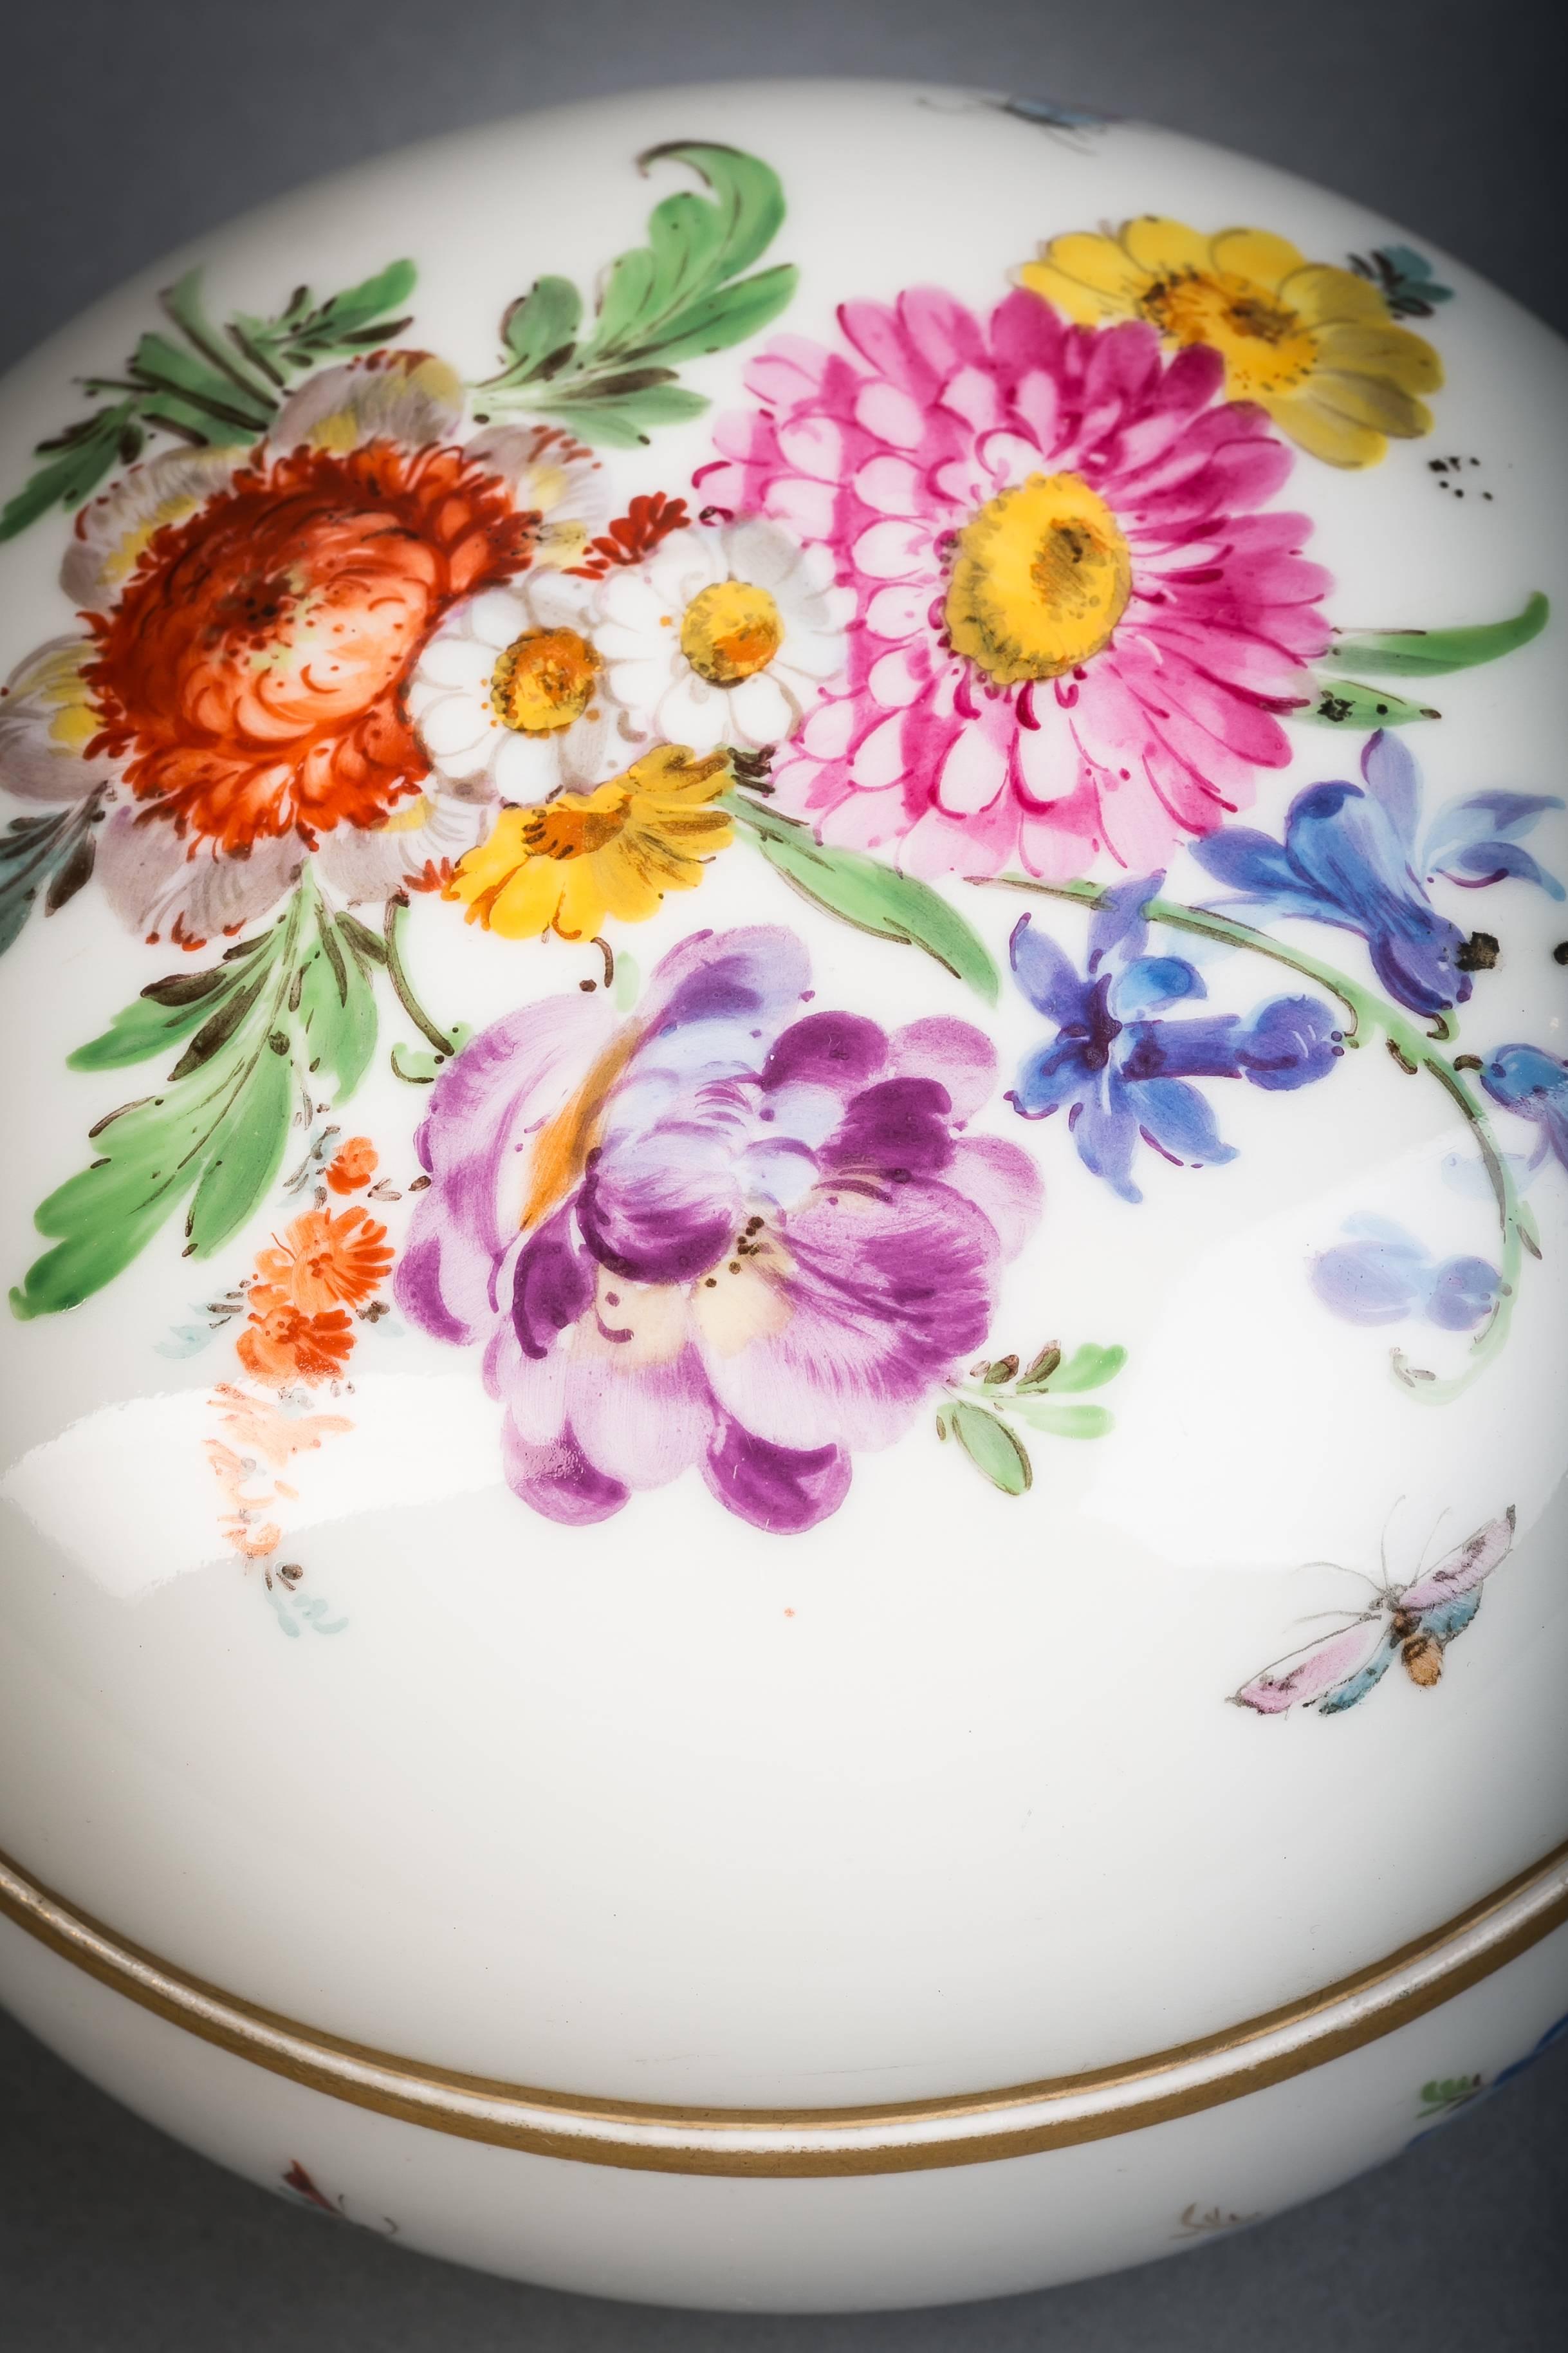 German porcelain box, Meissen, circa 1880.

With hand-painted flowers.